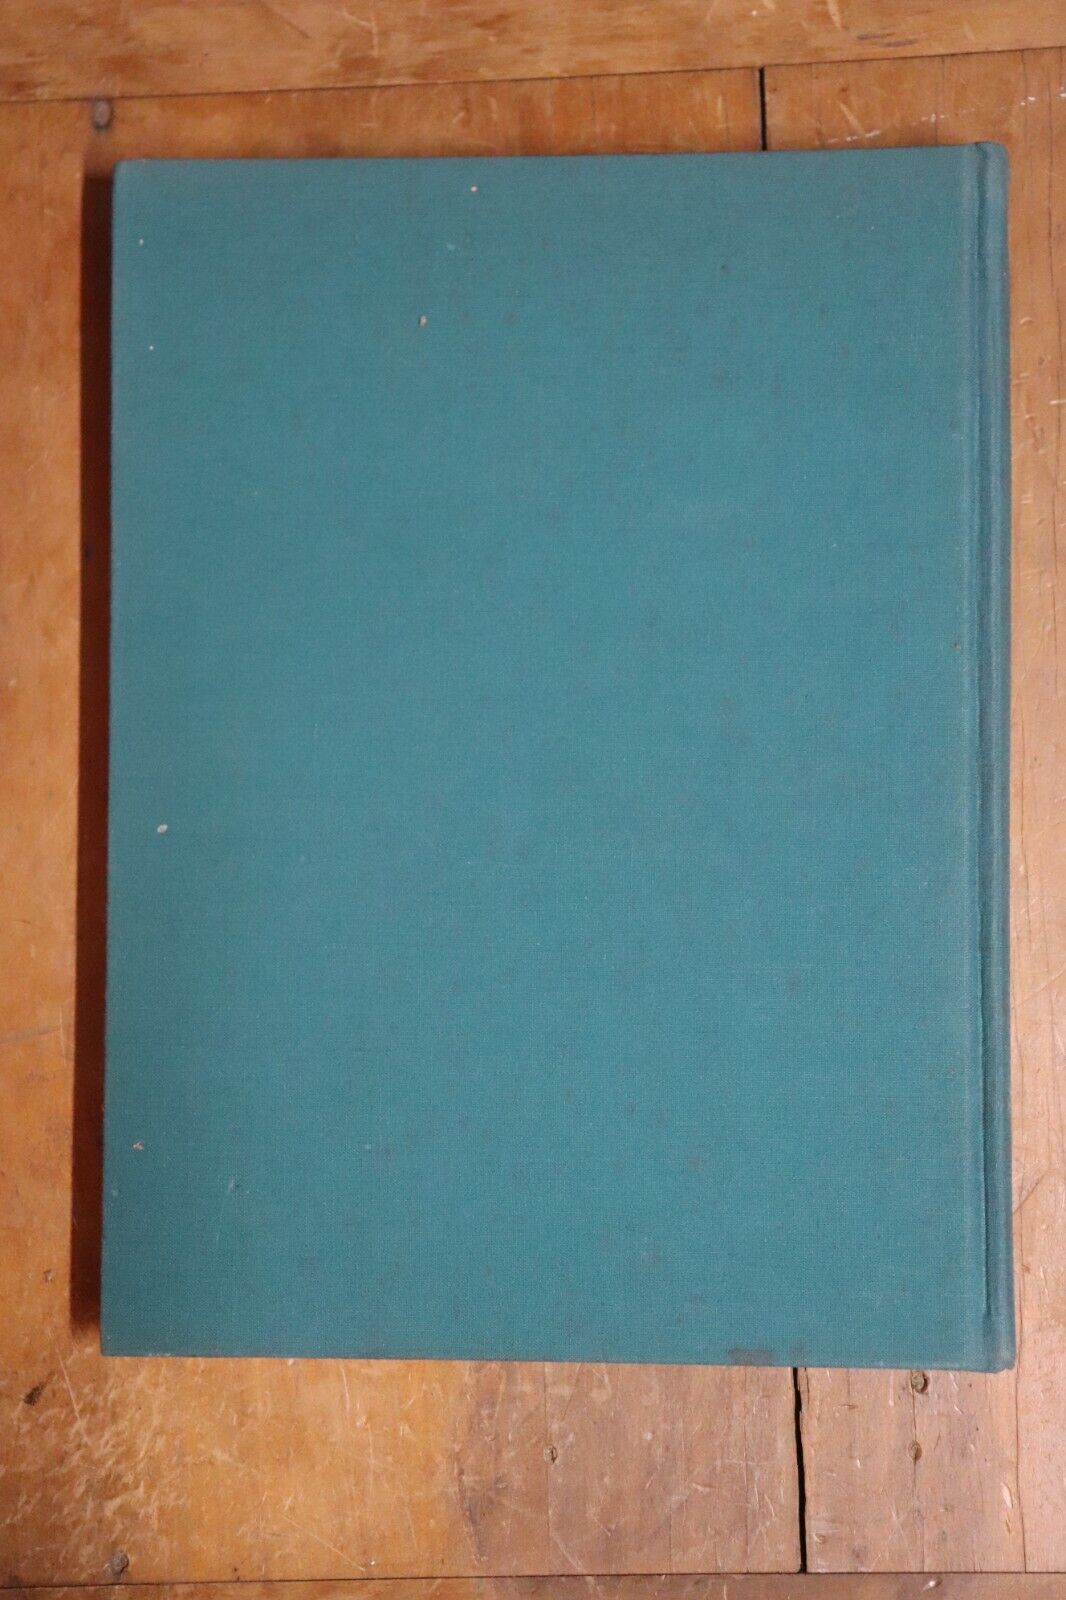 1952 Portrait Of The Old West by H. McCracken American History 1st Edition Book